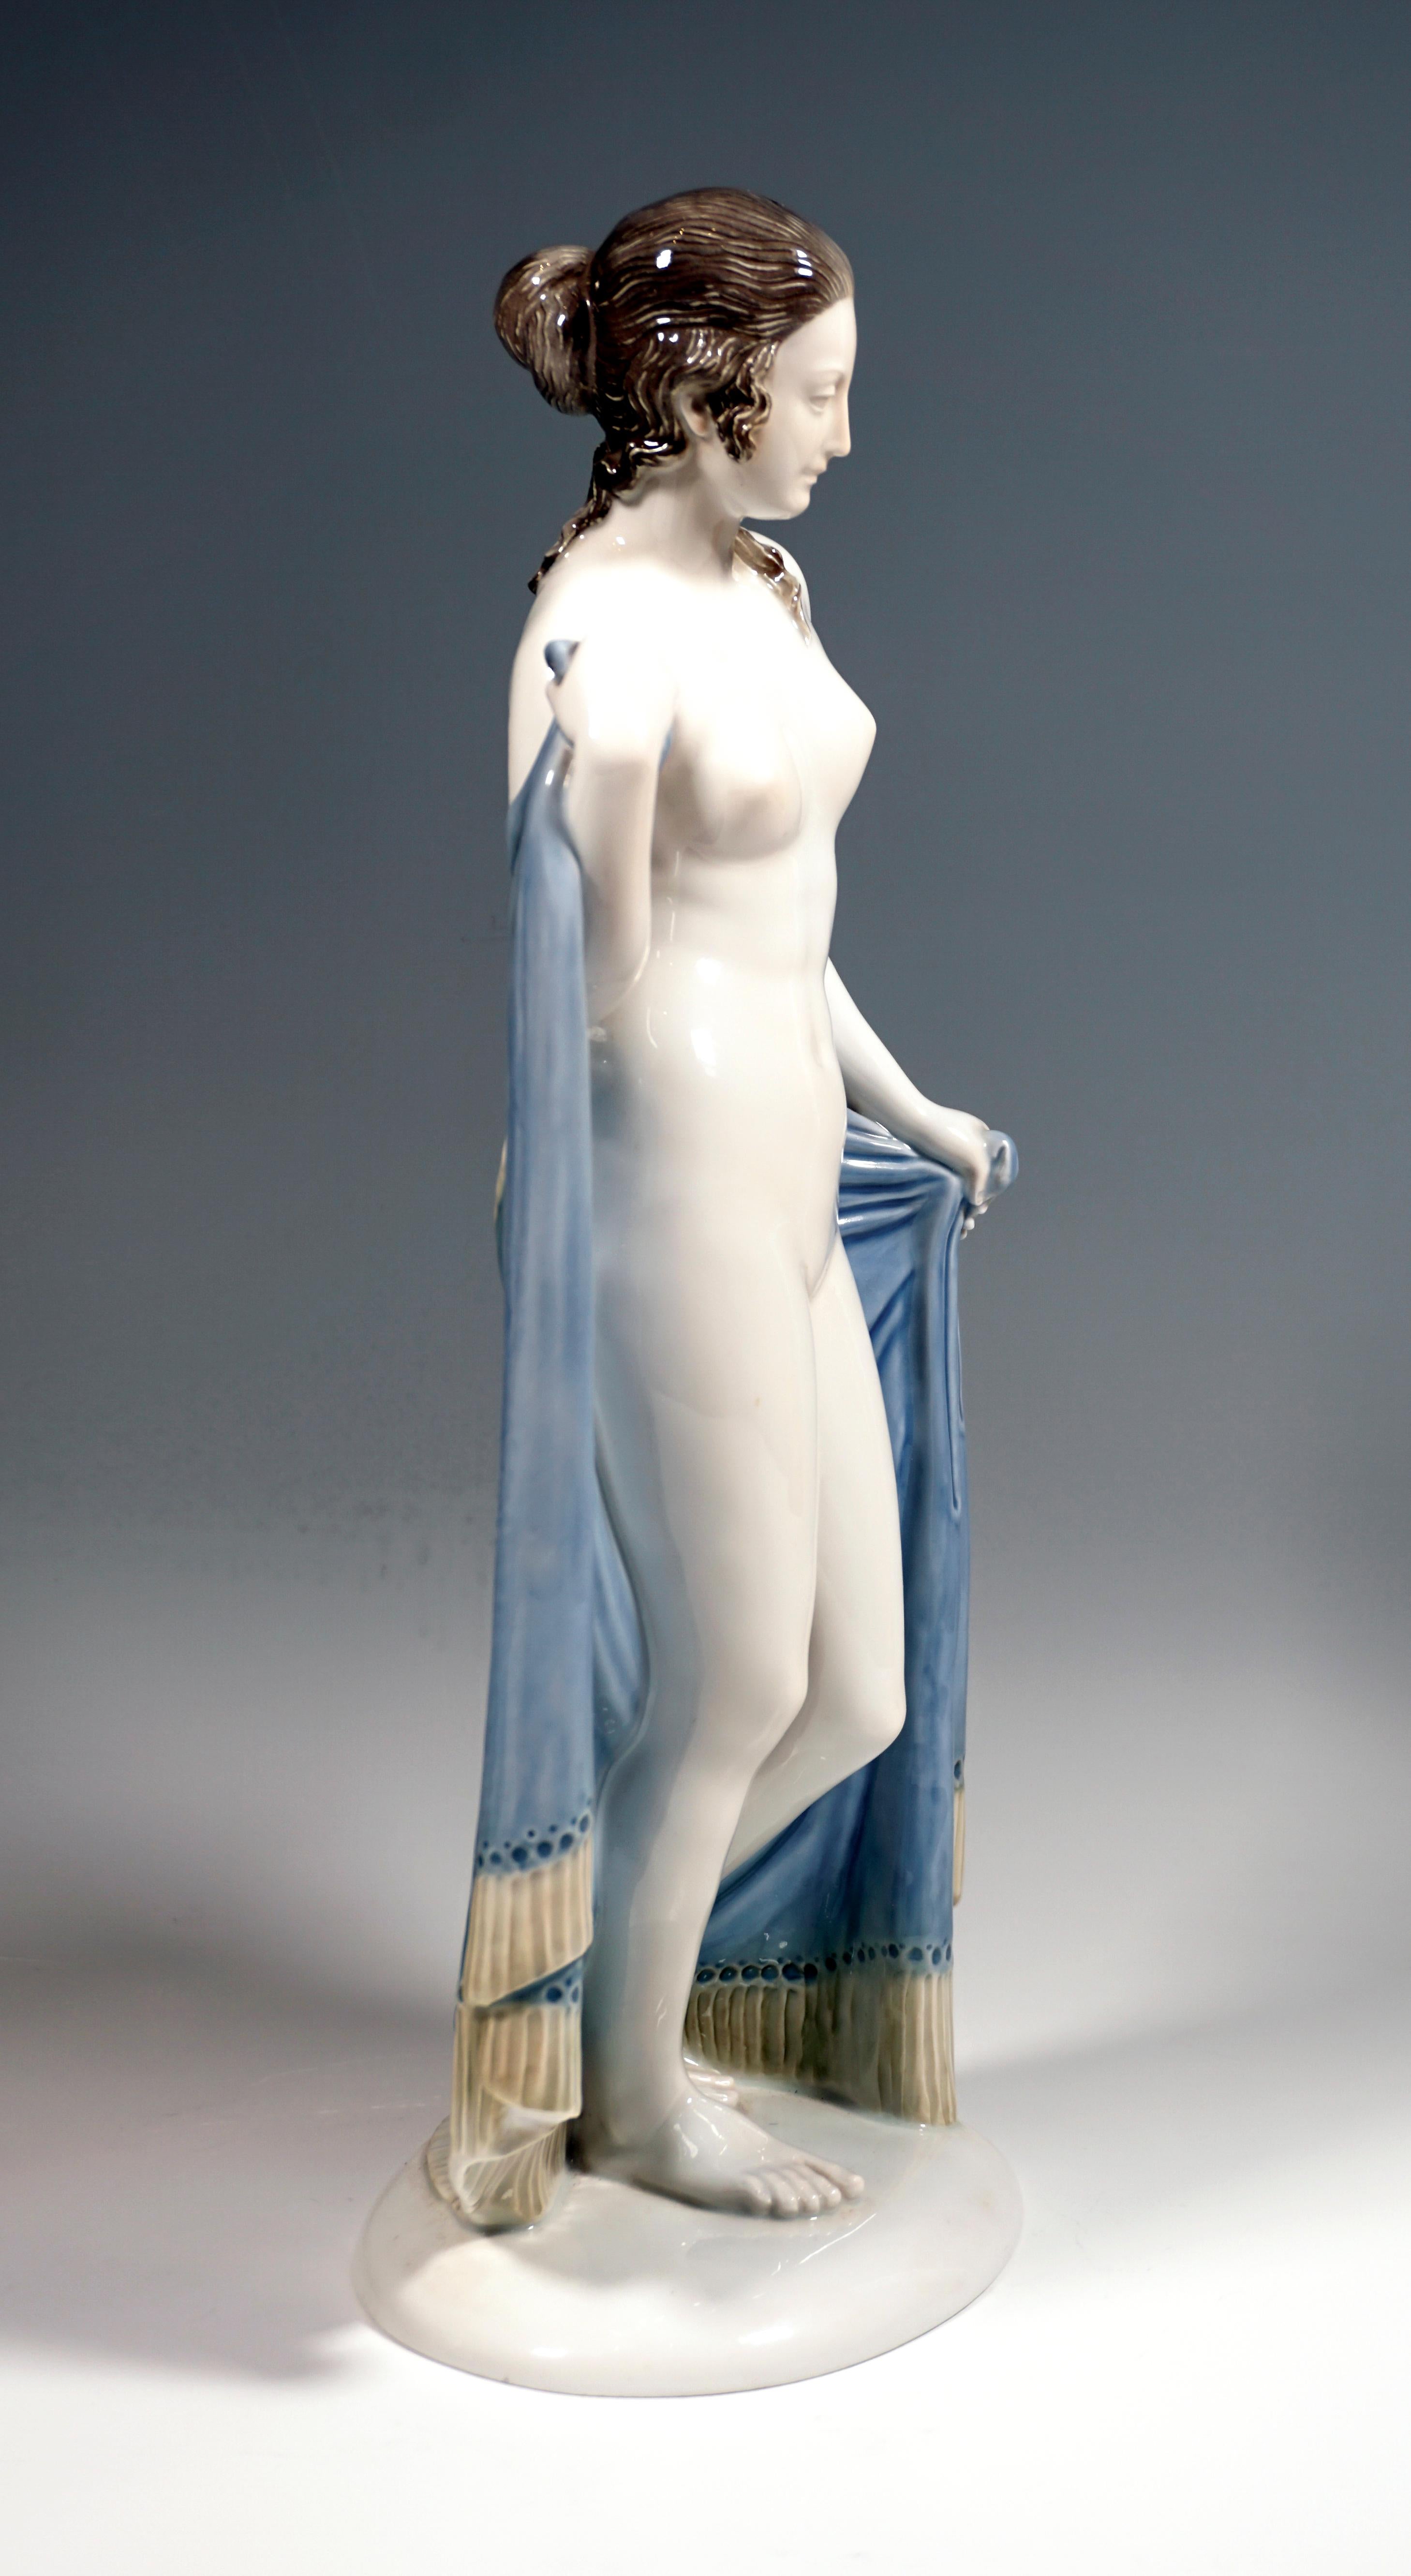 Large and rare Art Deco porcelain figurine of the 1920s.
Naked young lady with a well-formed, slender figure and hair combed back and pinned up in contraposto, holding a large, light blue cloth with cream-colored fringes behind her with both hands